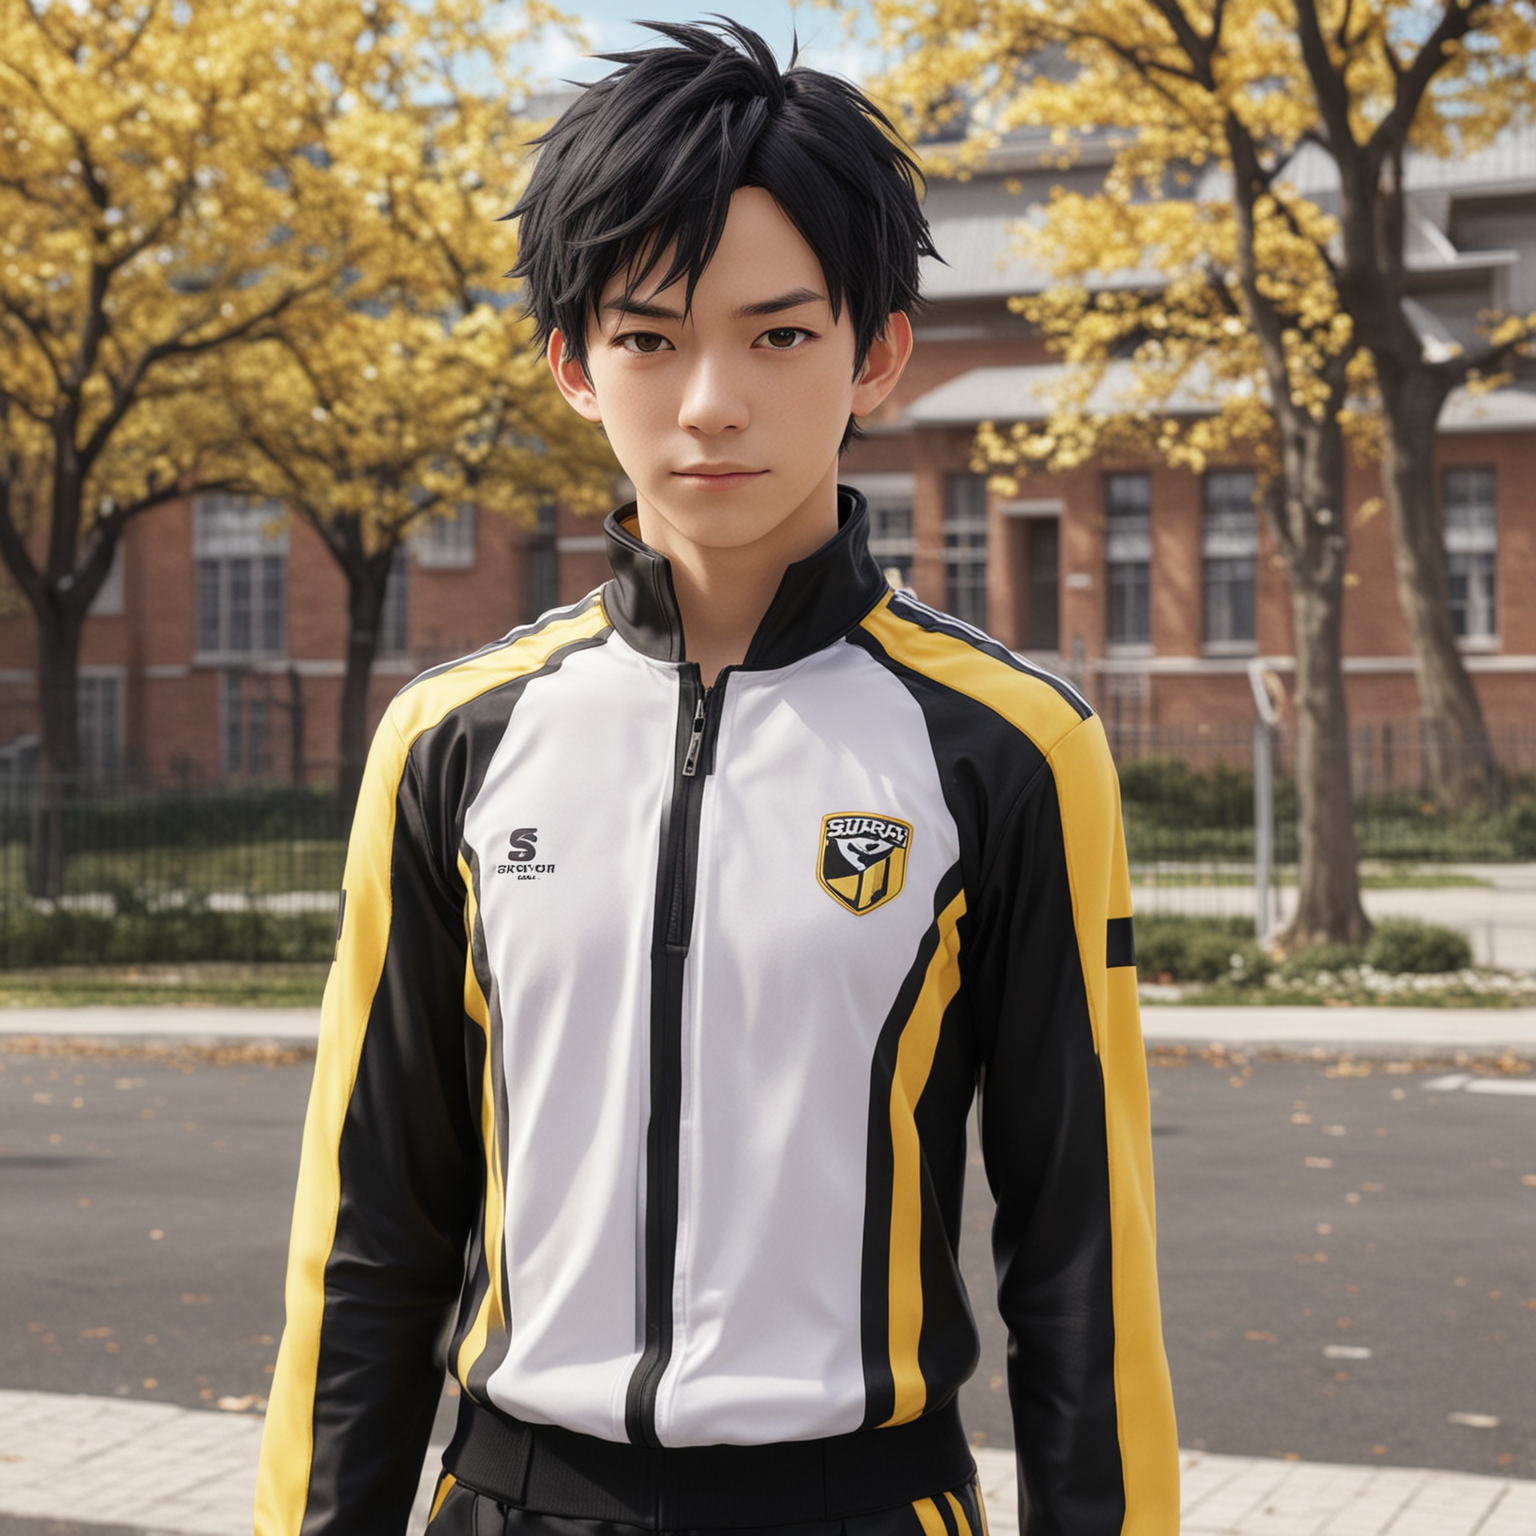 Subaru Natsuki from anime Re:Zero - Starting Life In Another World as a high-school male student, wearing black and white with yellow stripes sport costume, school yard on background , hyper-realistic, photo-realistic